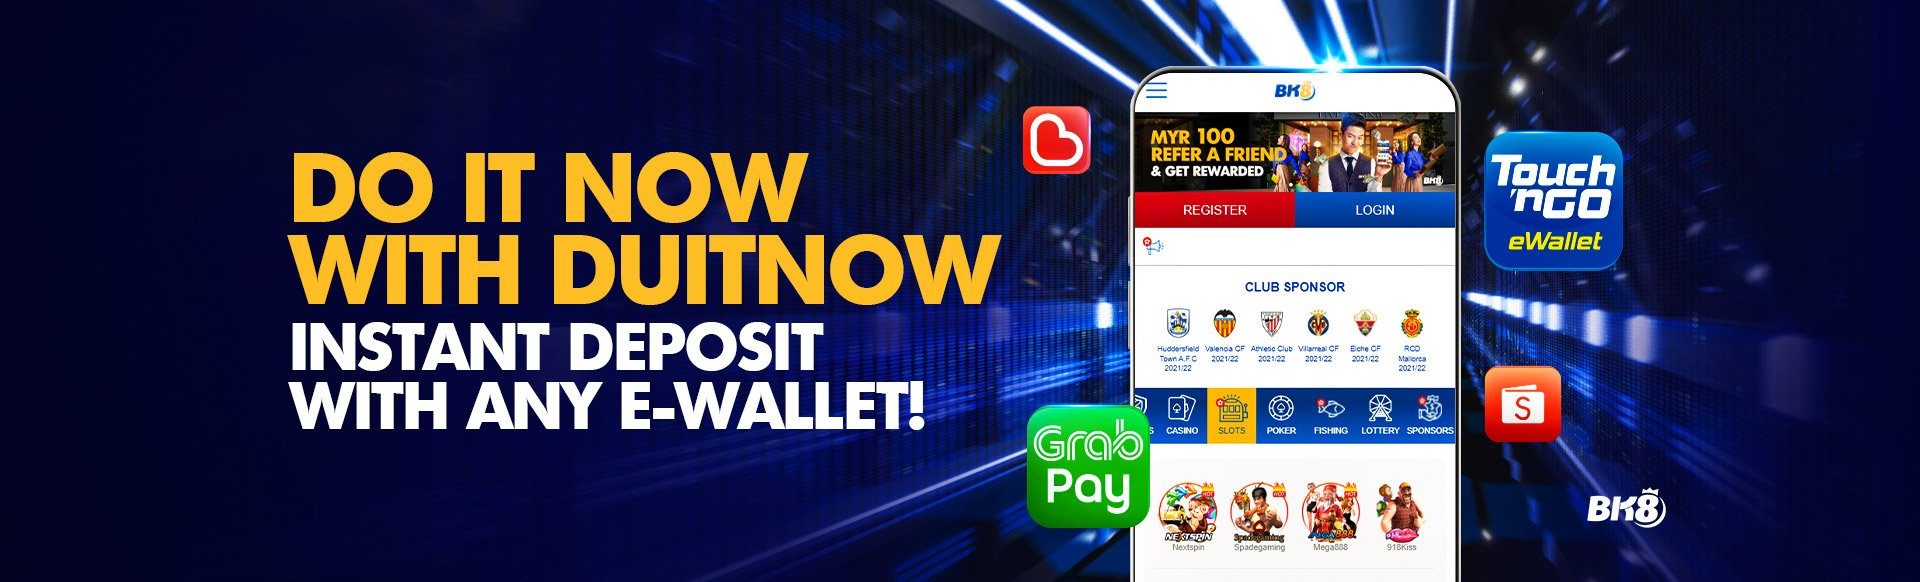 Do-It-Now-With-Duitnow-E-Wallet-BK8